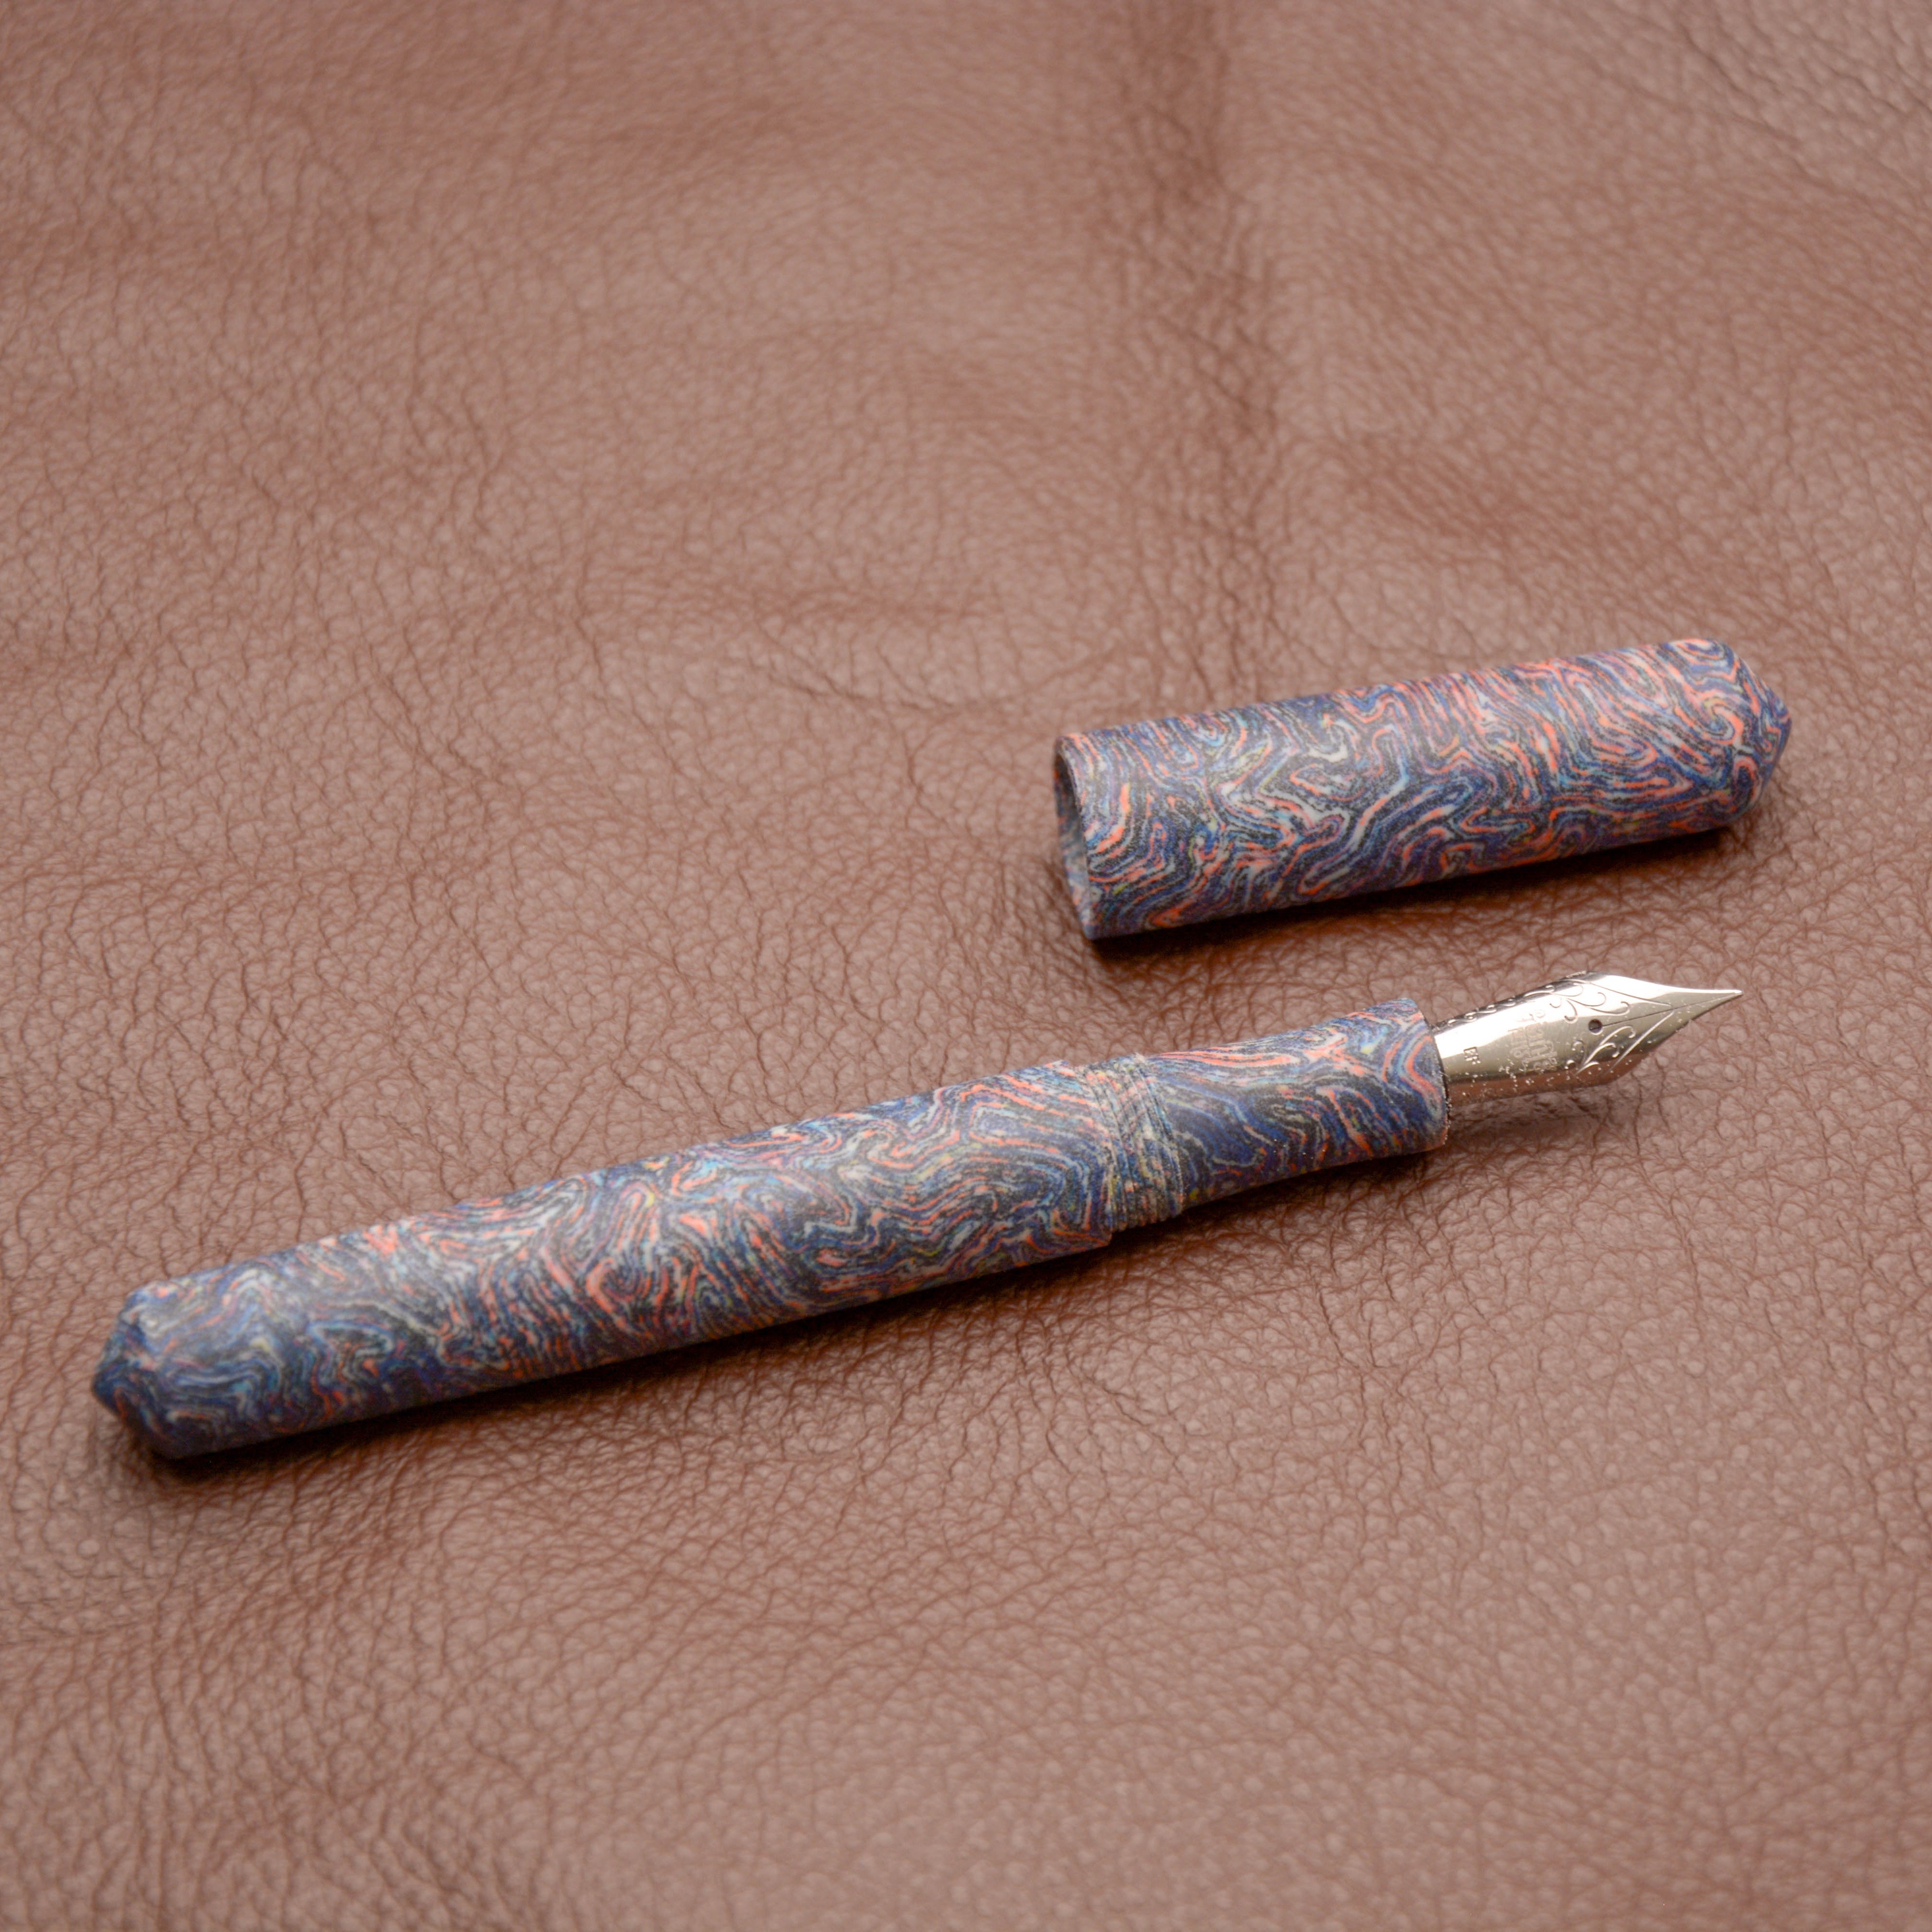 Fountain Pen - Jowo #6 - 13 mm - Blue, red and white Micarta